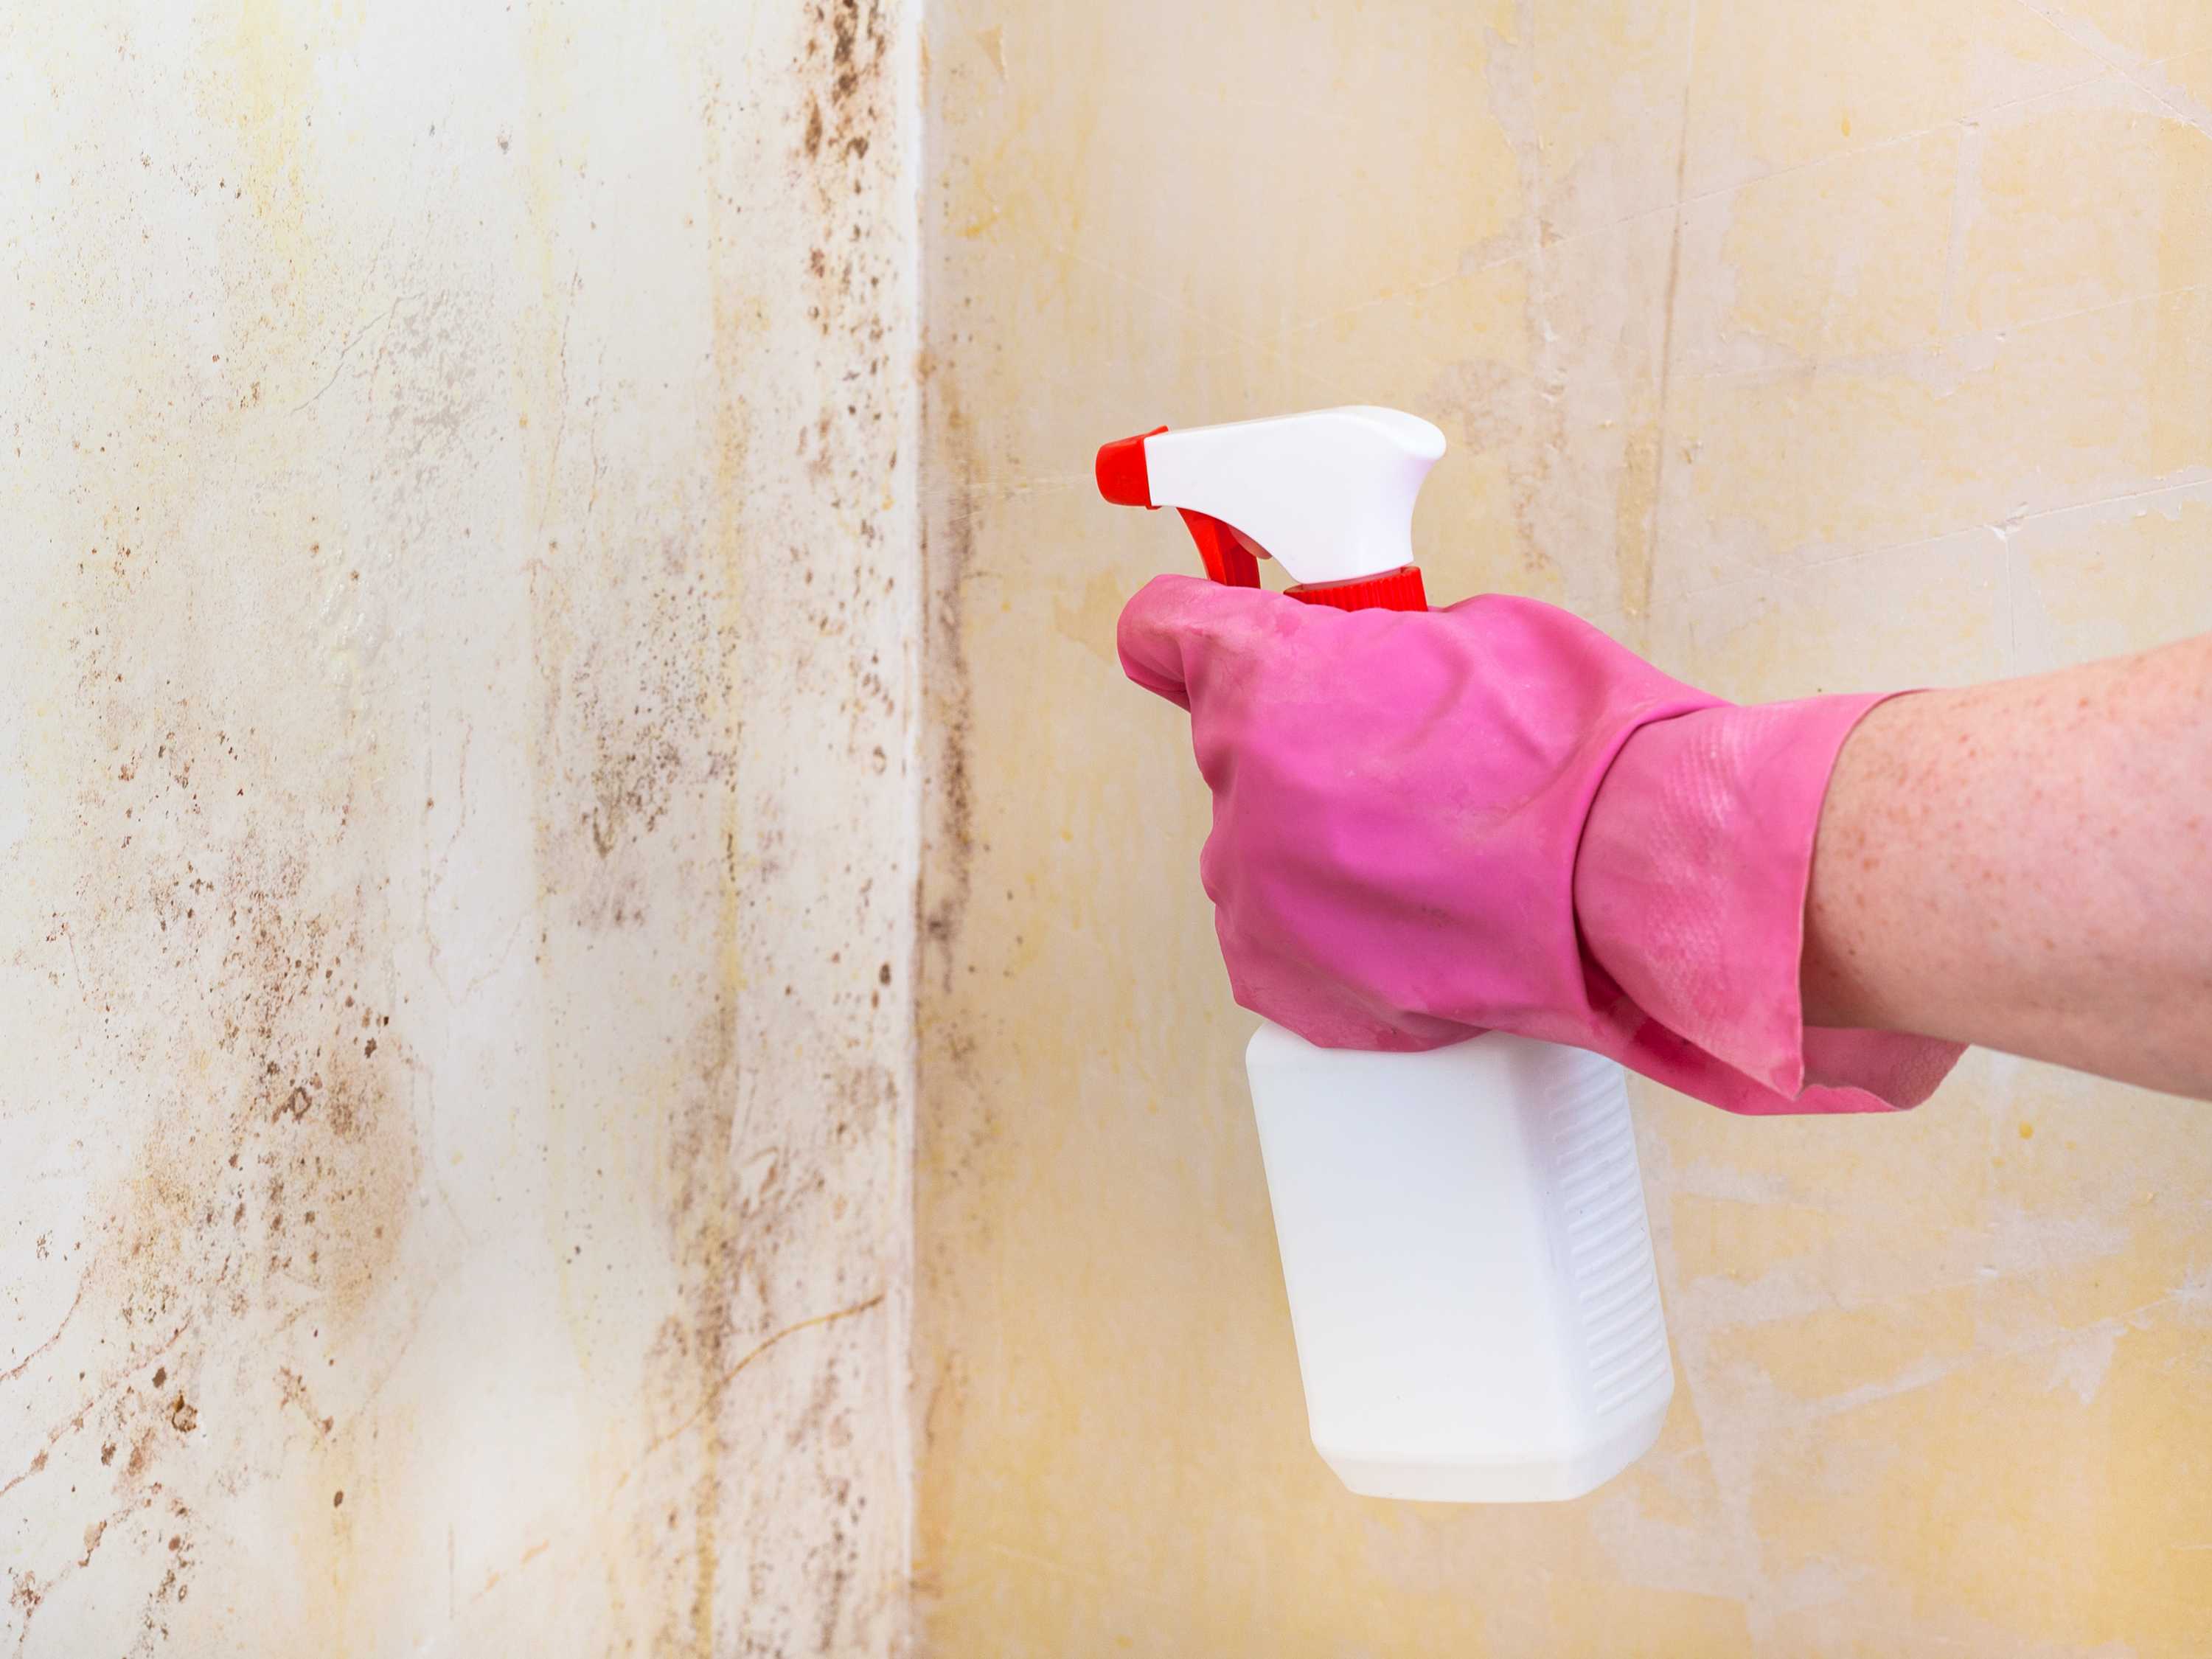 killing-of-mold-on-room-wall-with-chemical-spray-p44rqv8.jpg